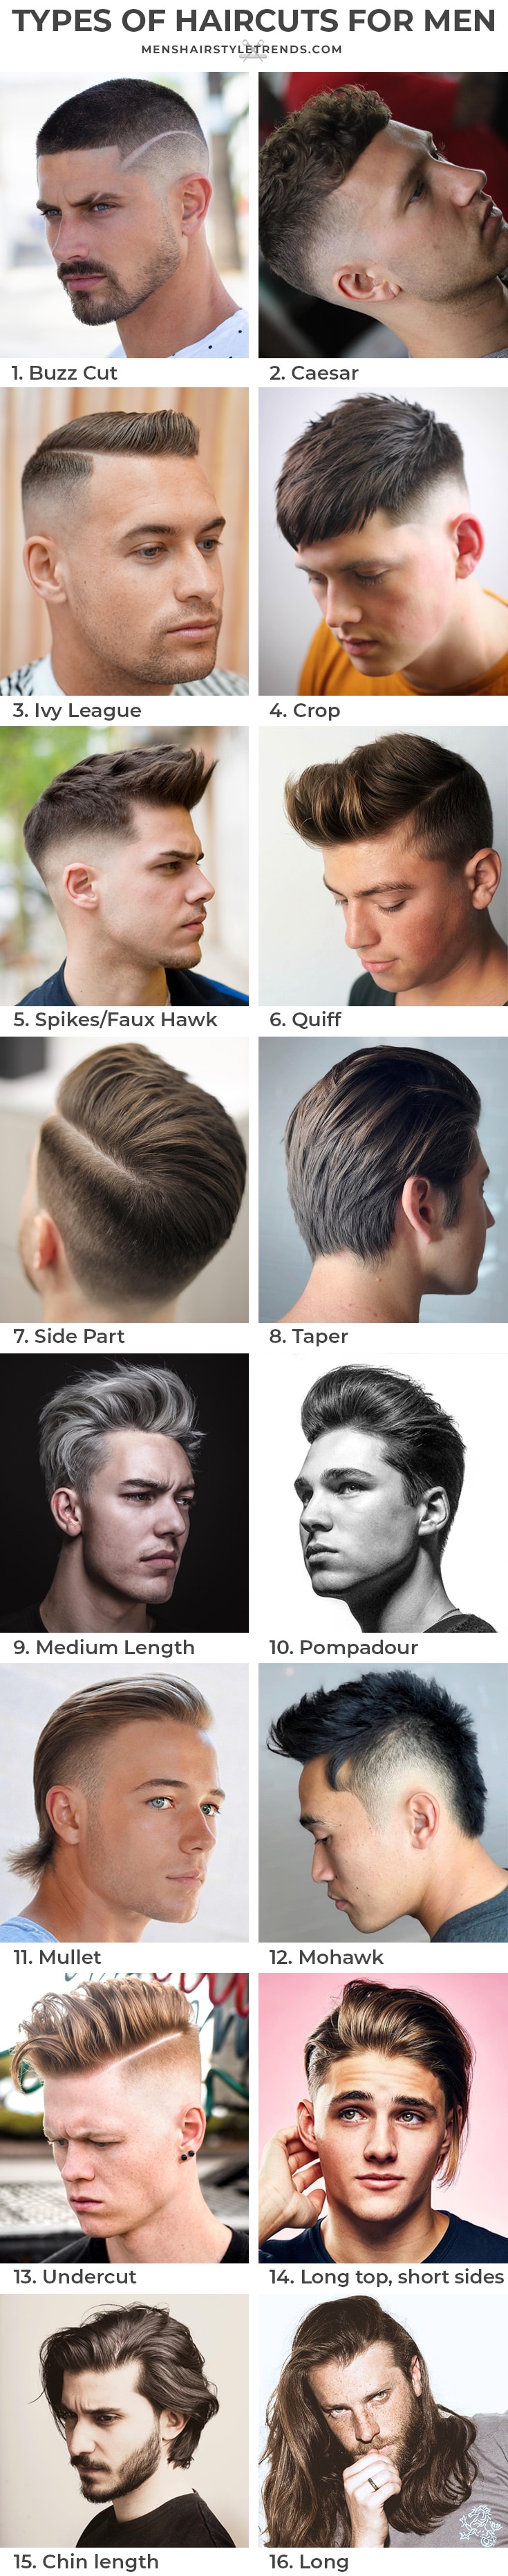 Types of haircuts for men - ultimate guide by Men's Hairstyle Trends